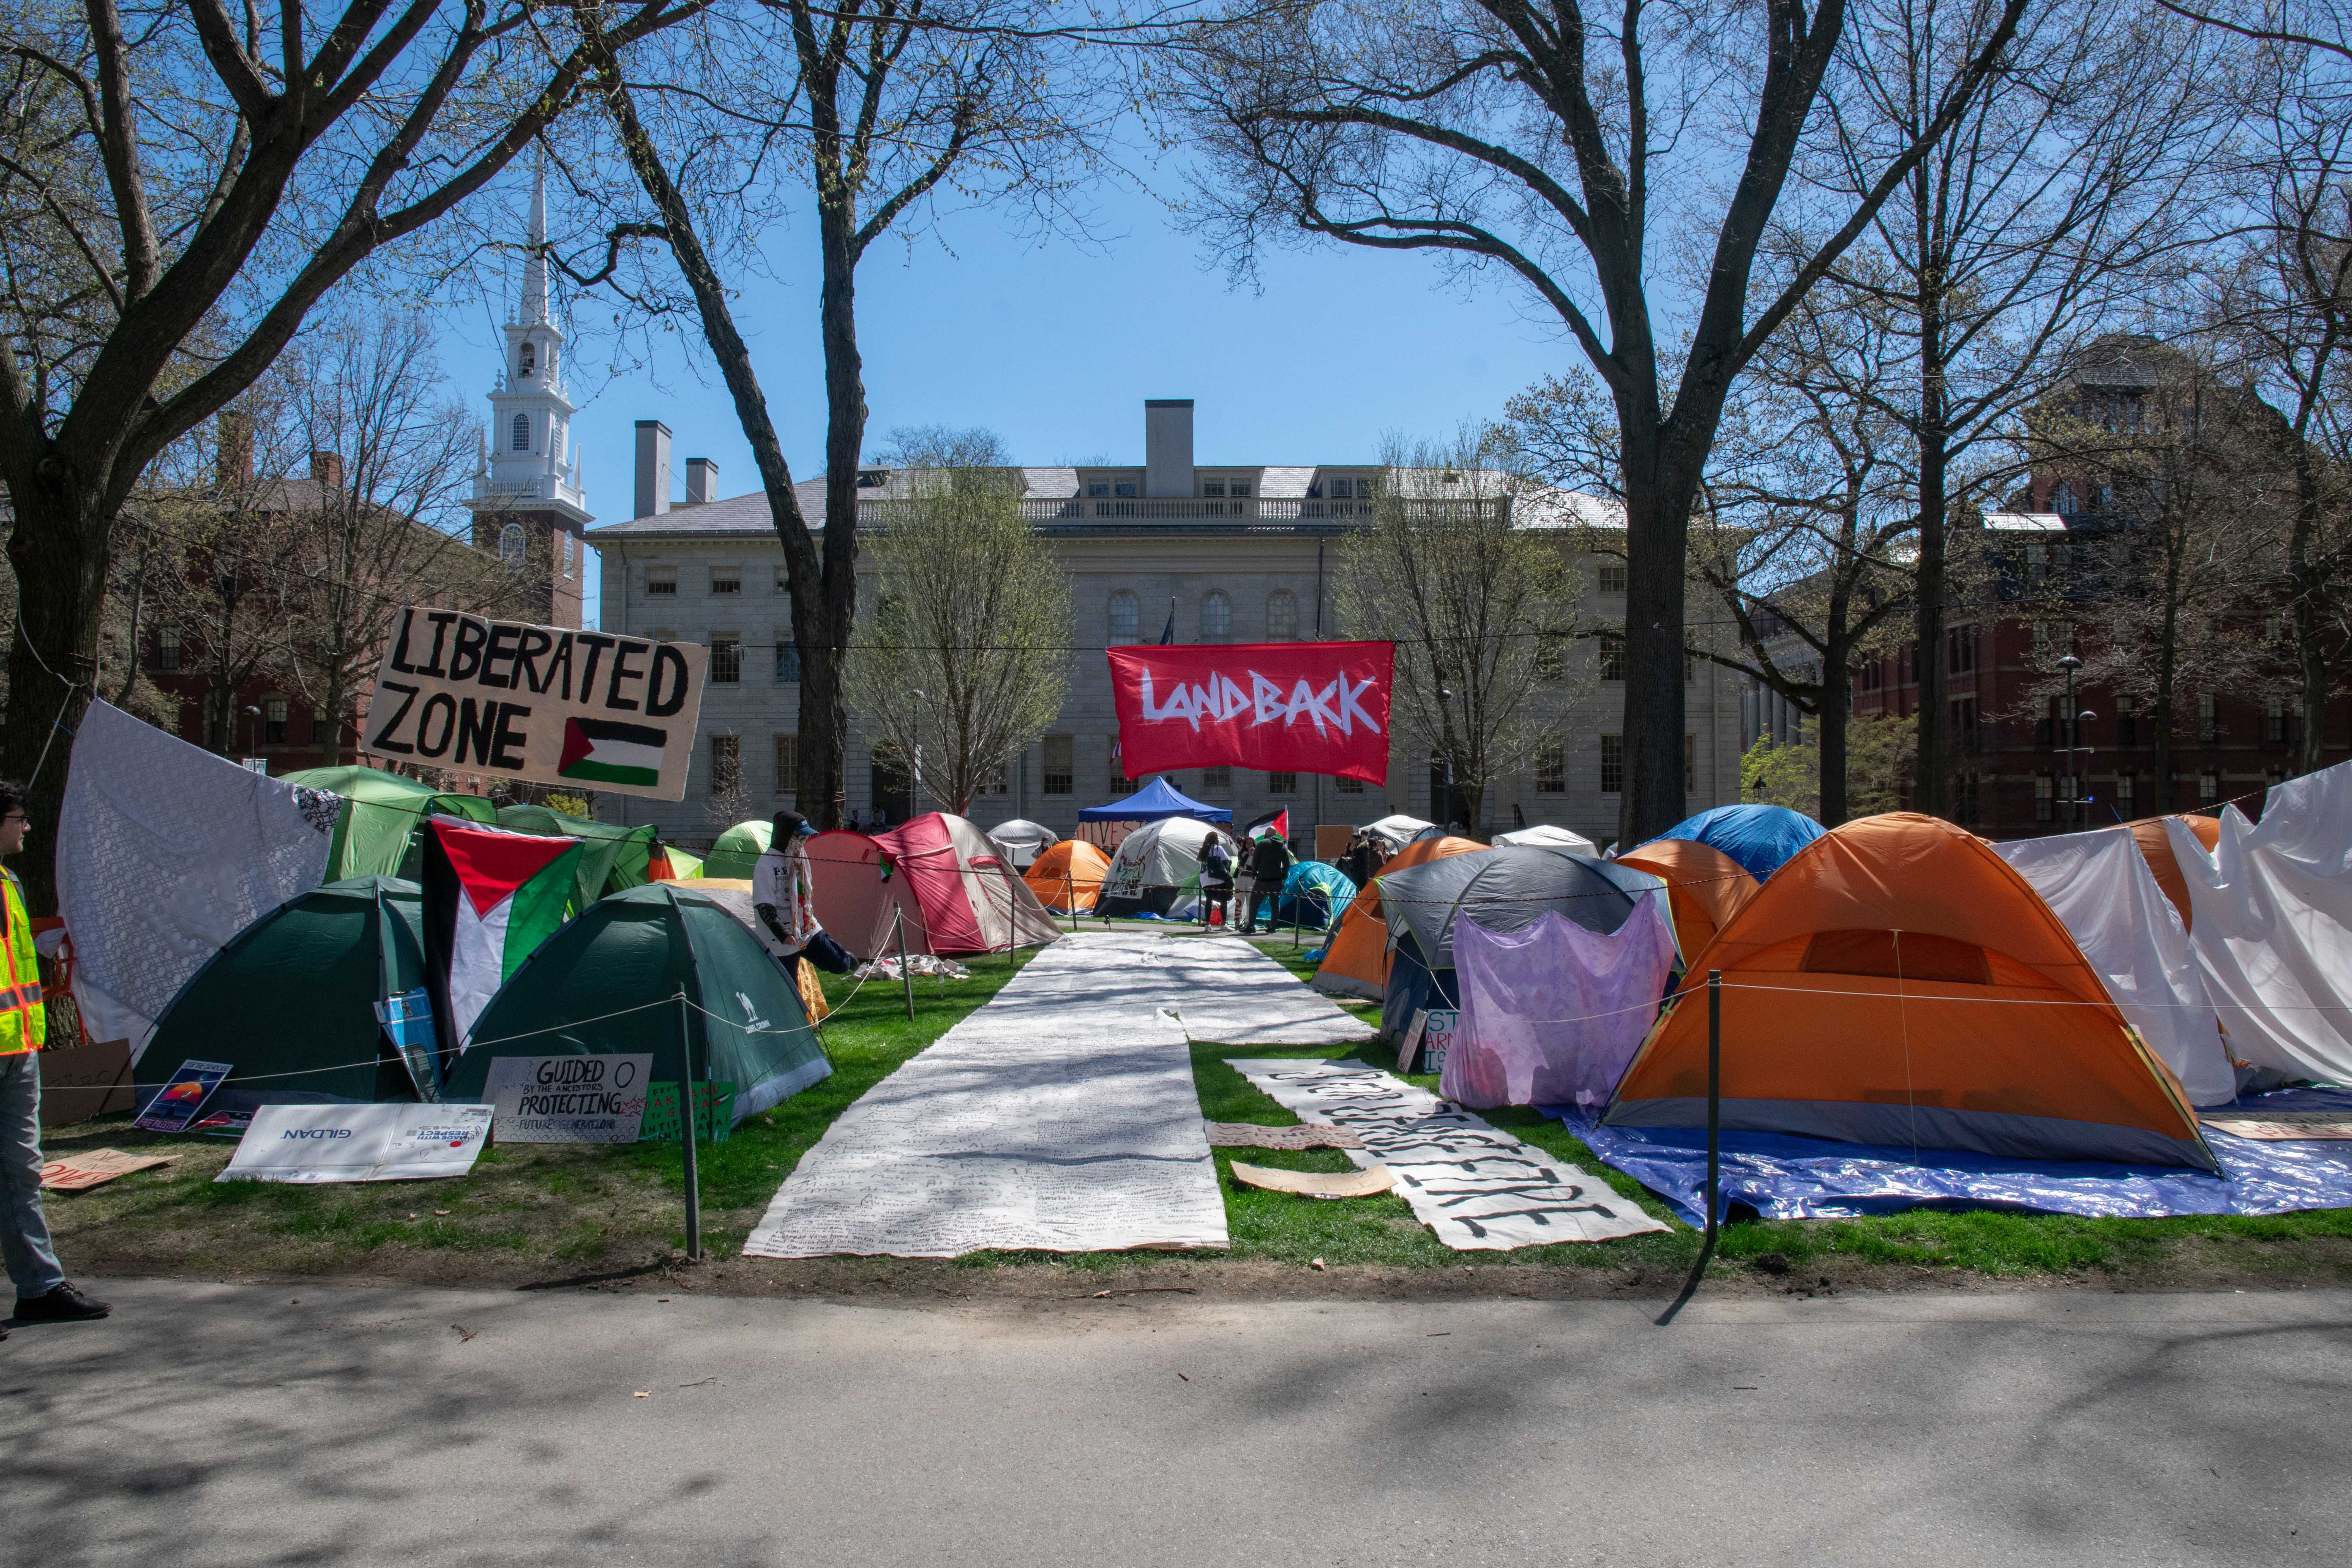 More than 30 tents cover the lawn in front of the John Harvard statue and University Hall on the third day of the encampment. Large banners strung overheasd rerad “Liberated Zone” and “Land Back.”